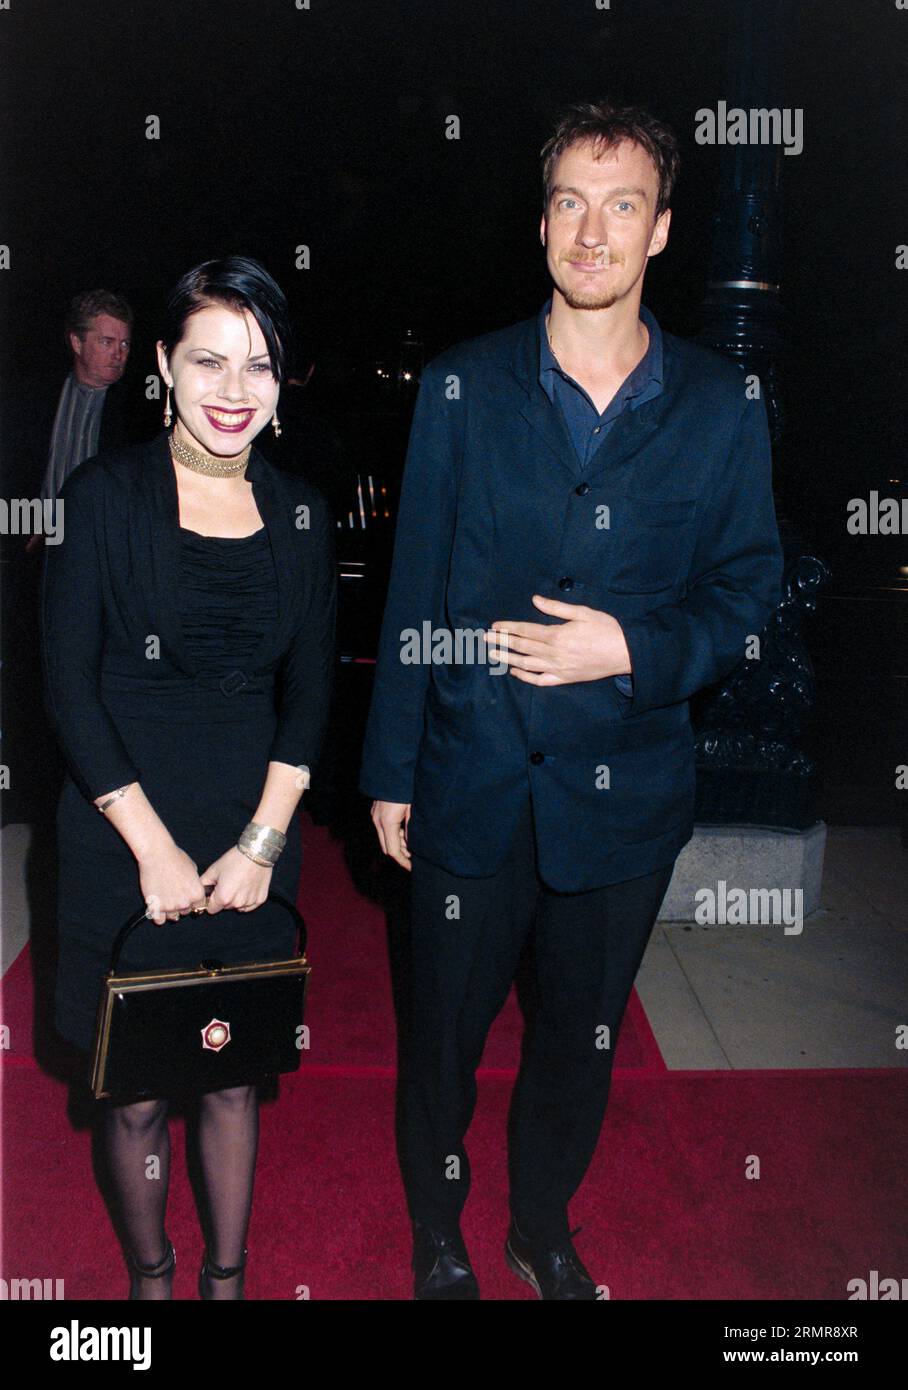 LOS ANGELES, CA. March 31, 1997: Actor David Thewlis & actress Fairuza Balk at the premiere of ÒThe SaintÓ at the Academy of Motion Pictures Arts & Sciences. Picture: Paul Smith / Featureflash Stock Photo